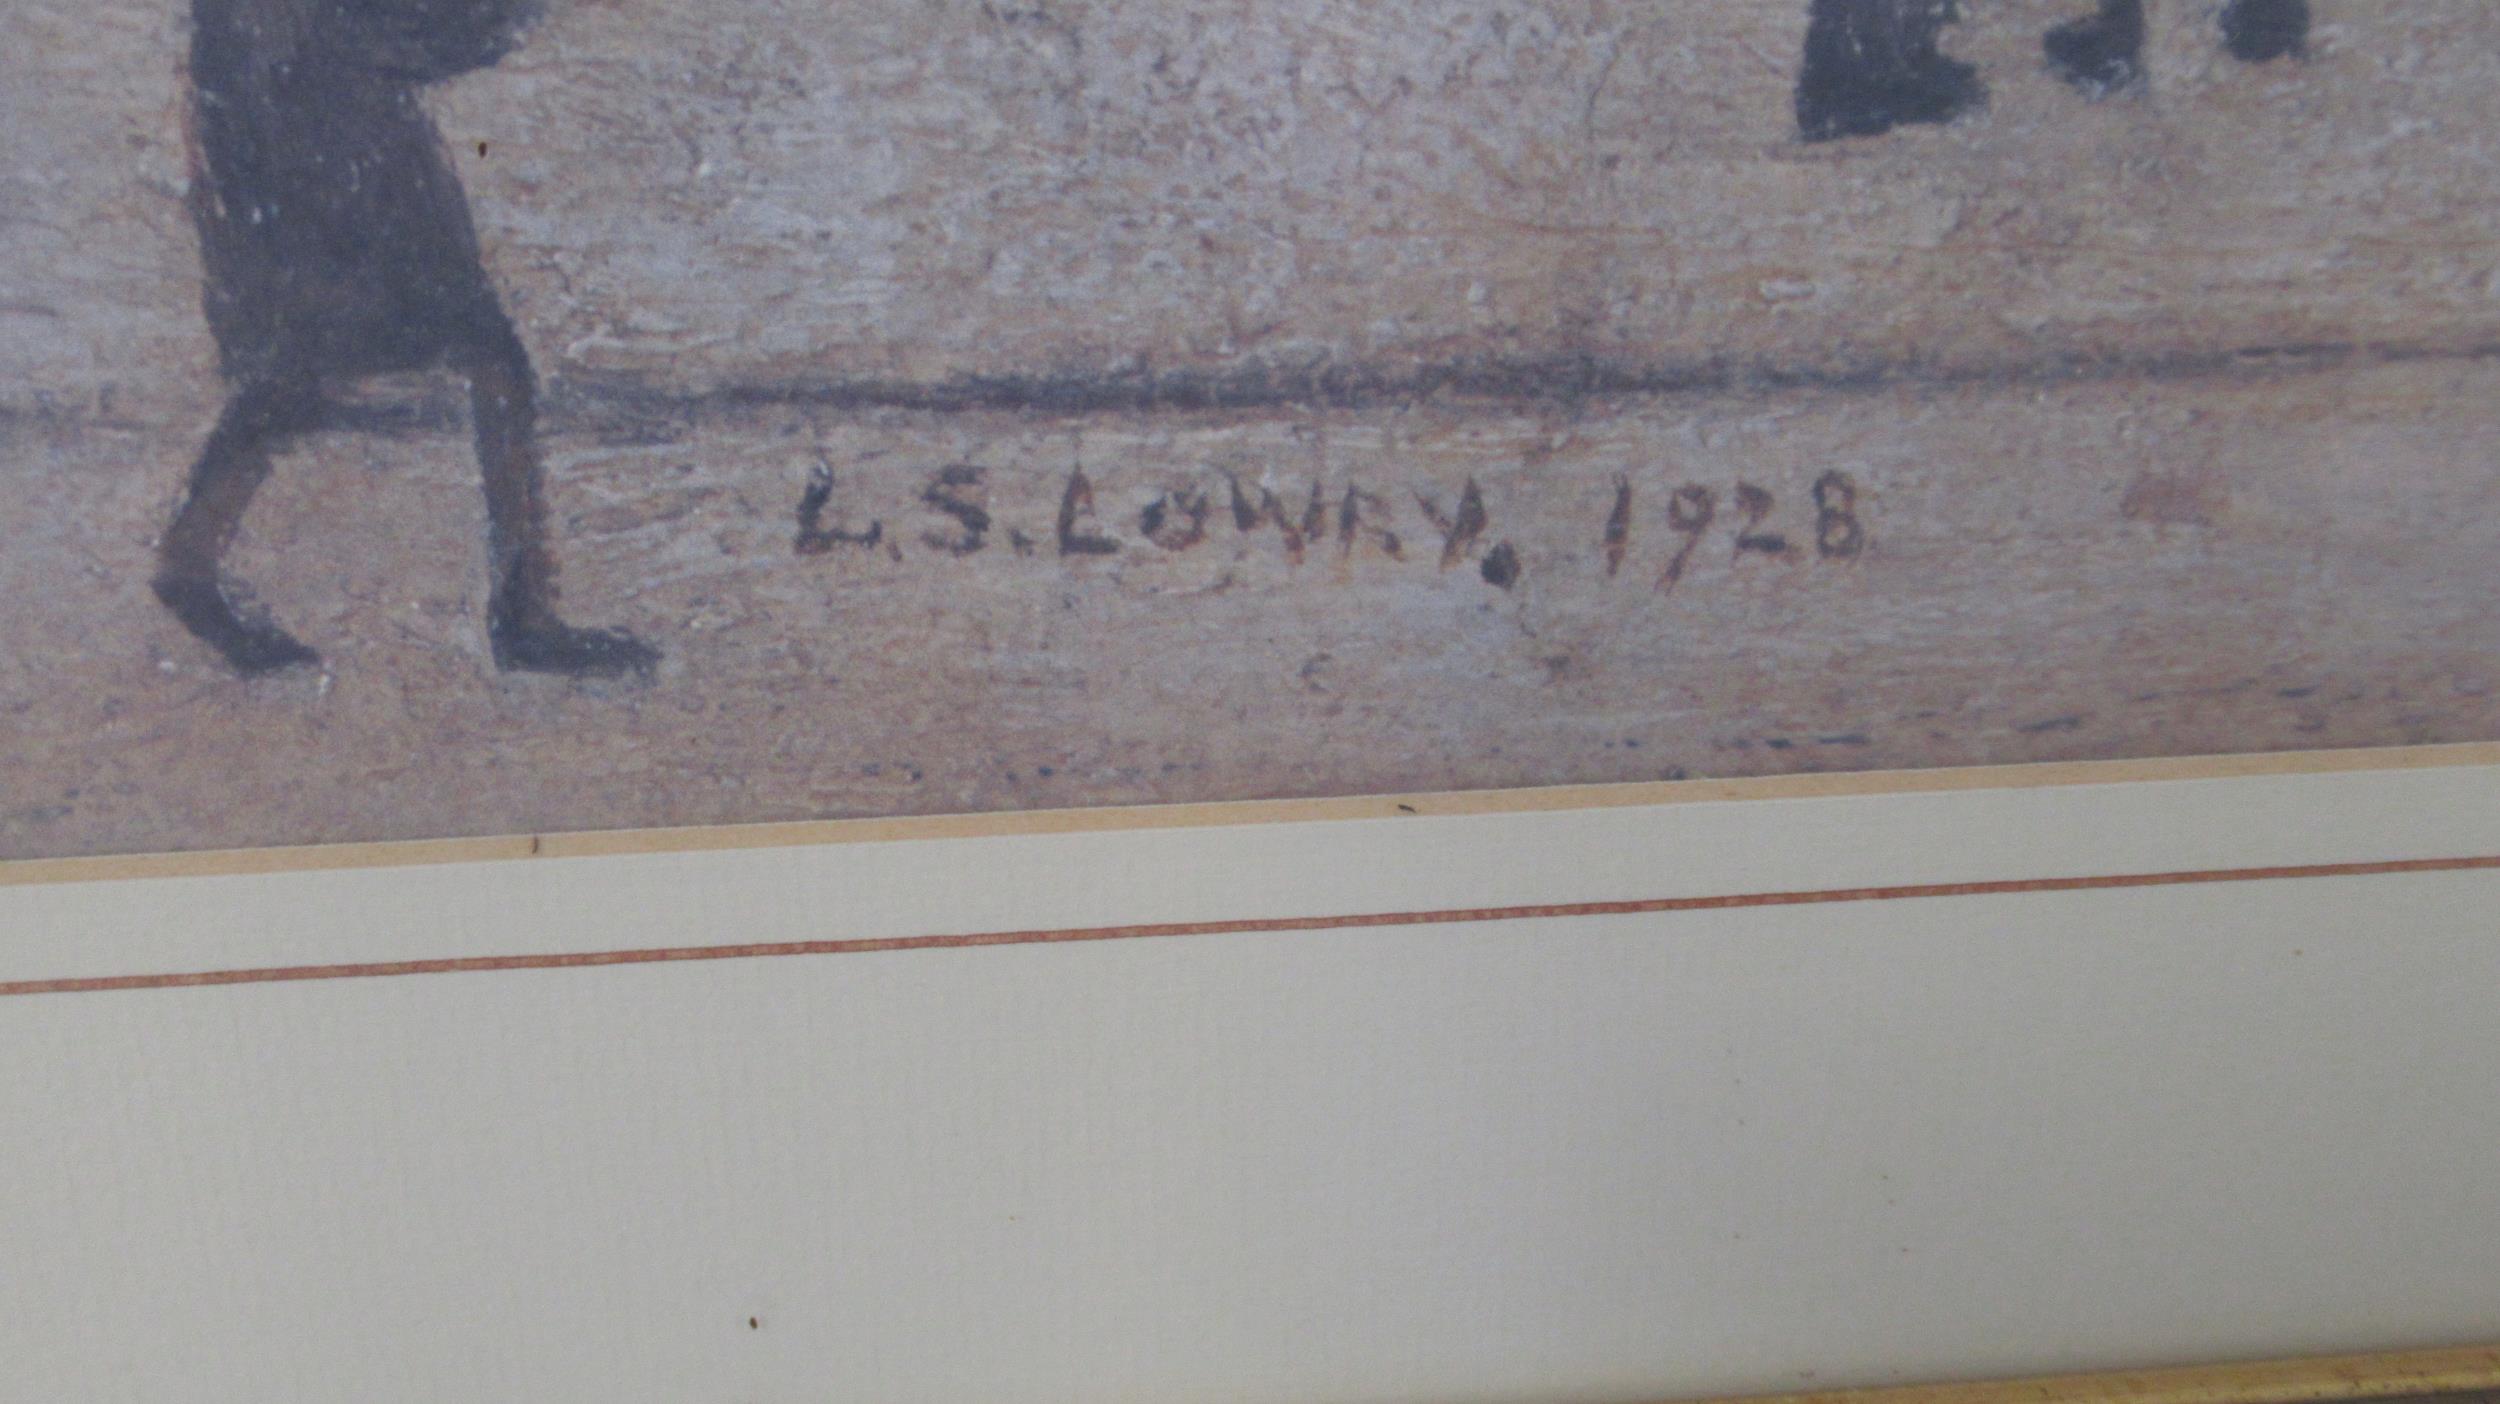 A signed Lowry print signed LS Lowry 1928, 85cm wide x 70cm high - Image 2 of 3